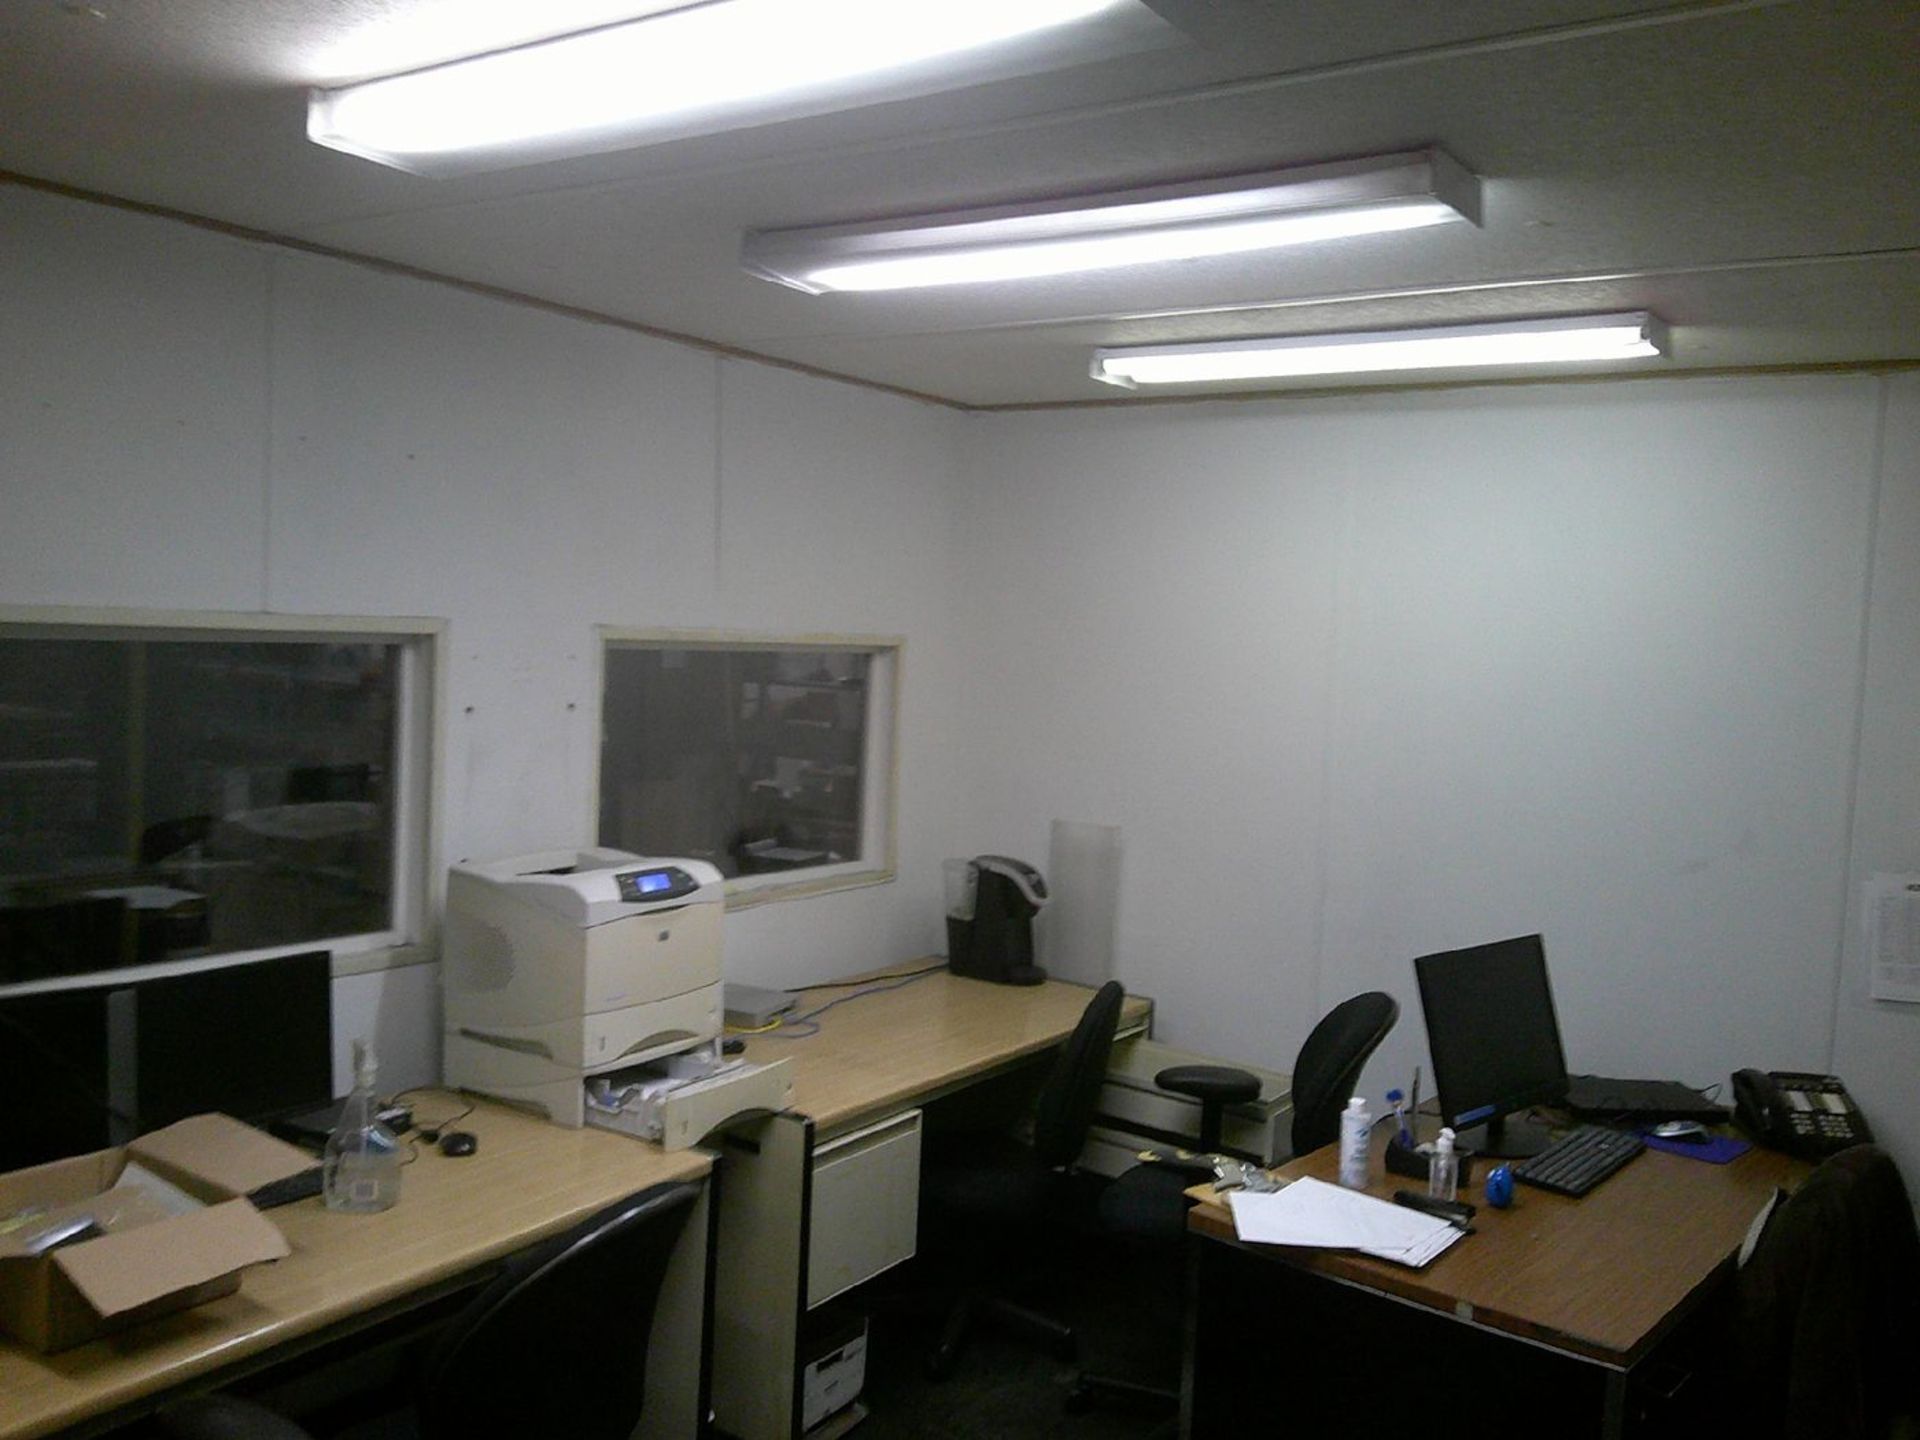 Speed Space 140" x 136" x 114" High Steel Modular Shop Office; with Door, Air Conditioner, Windows - Image 5 of 6